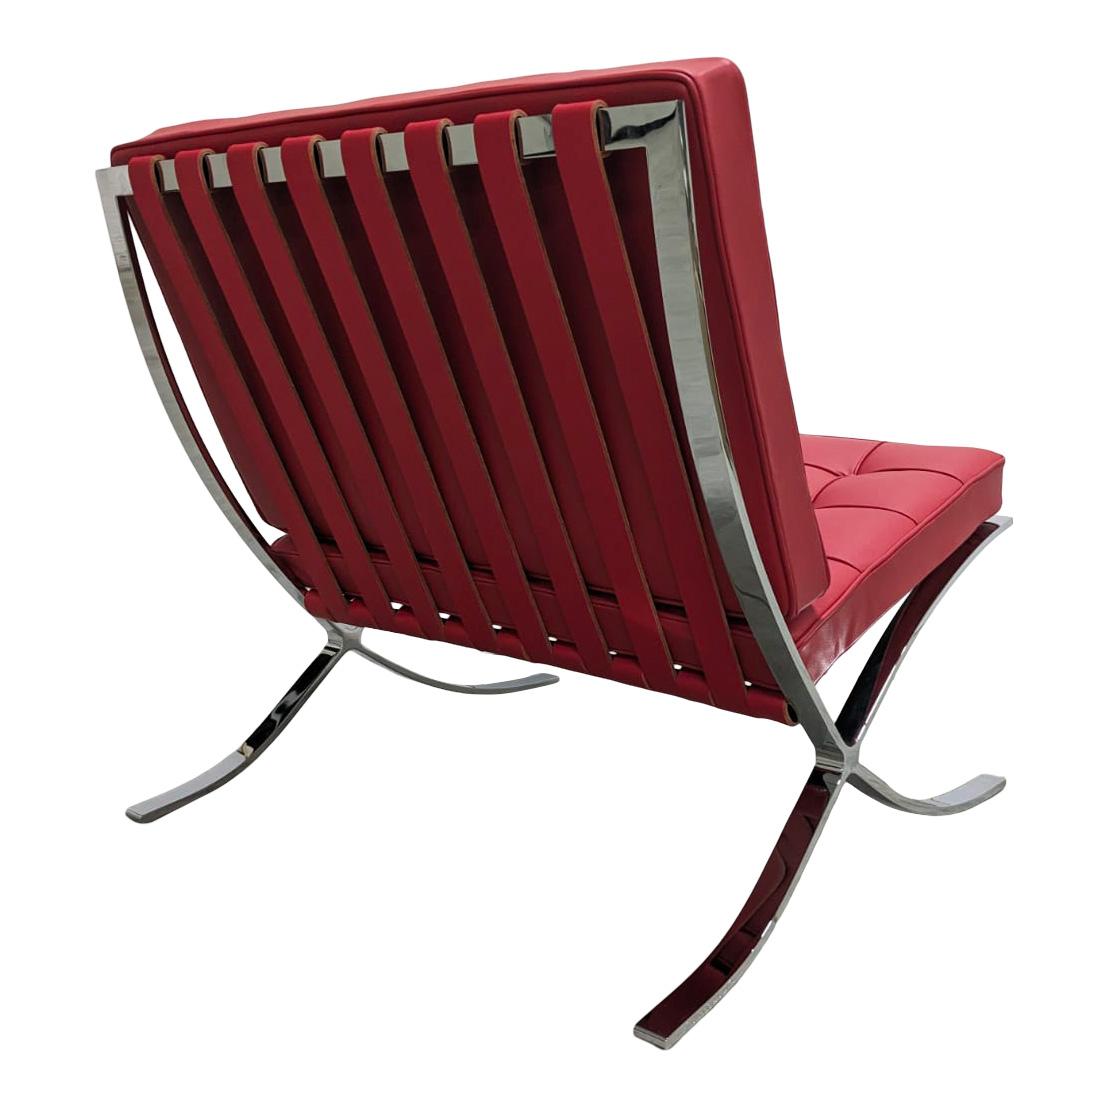 Late 20th Century Ludwig Mies Van Der Rohe Bauhaus Red Barcelona Lounge Chair for Knoll, 1972 For Sale